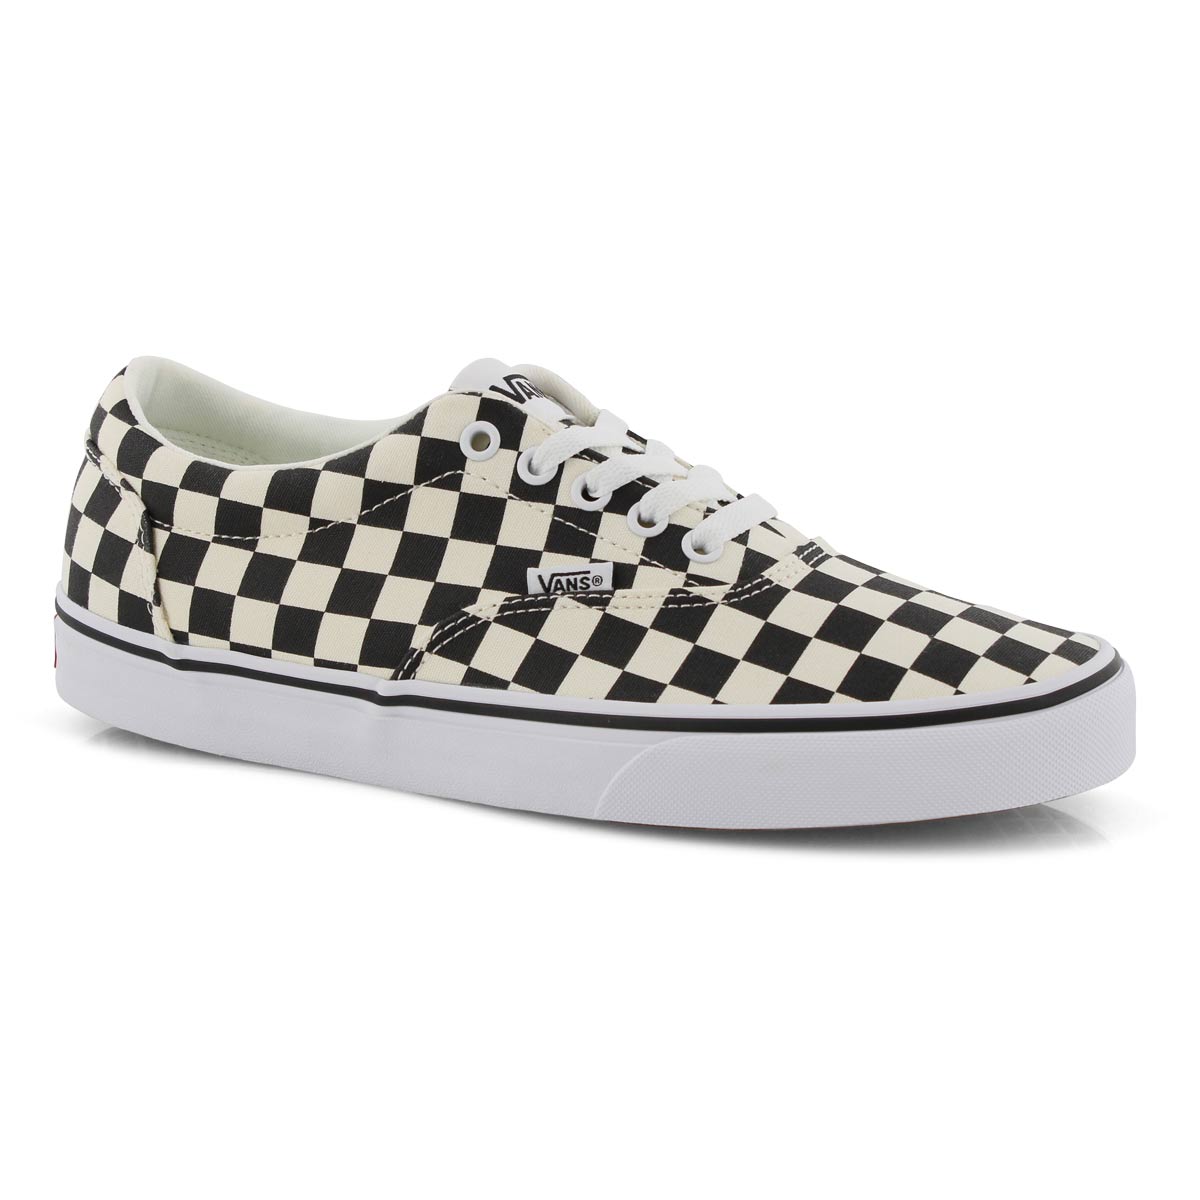 black and white checkered vans with laces